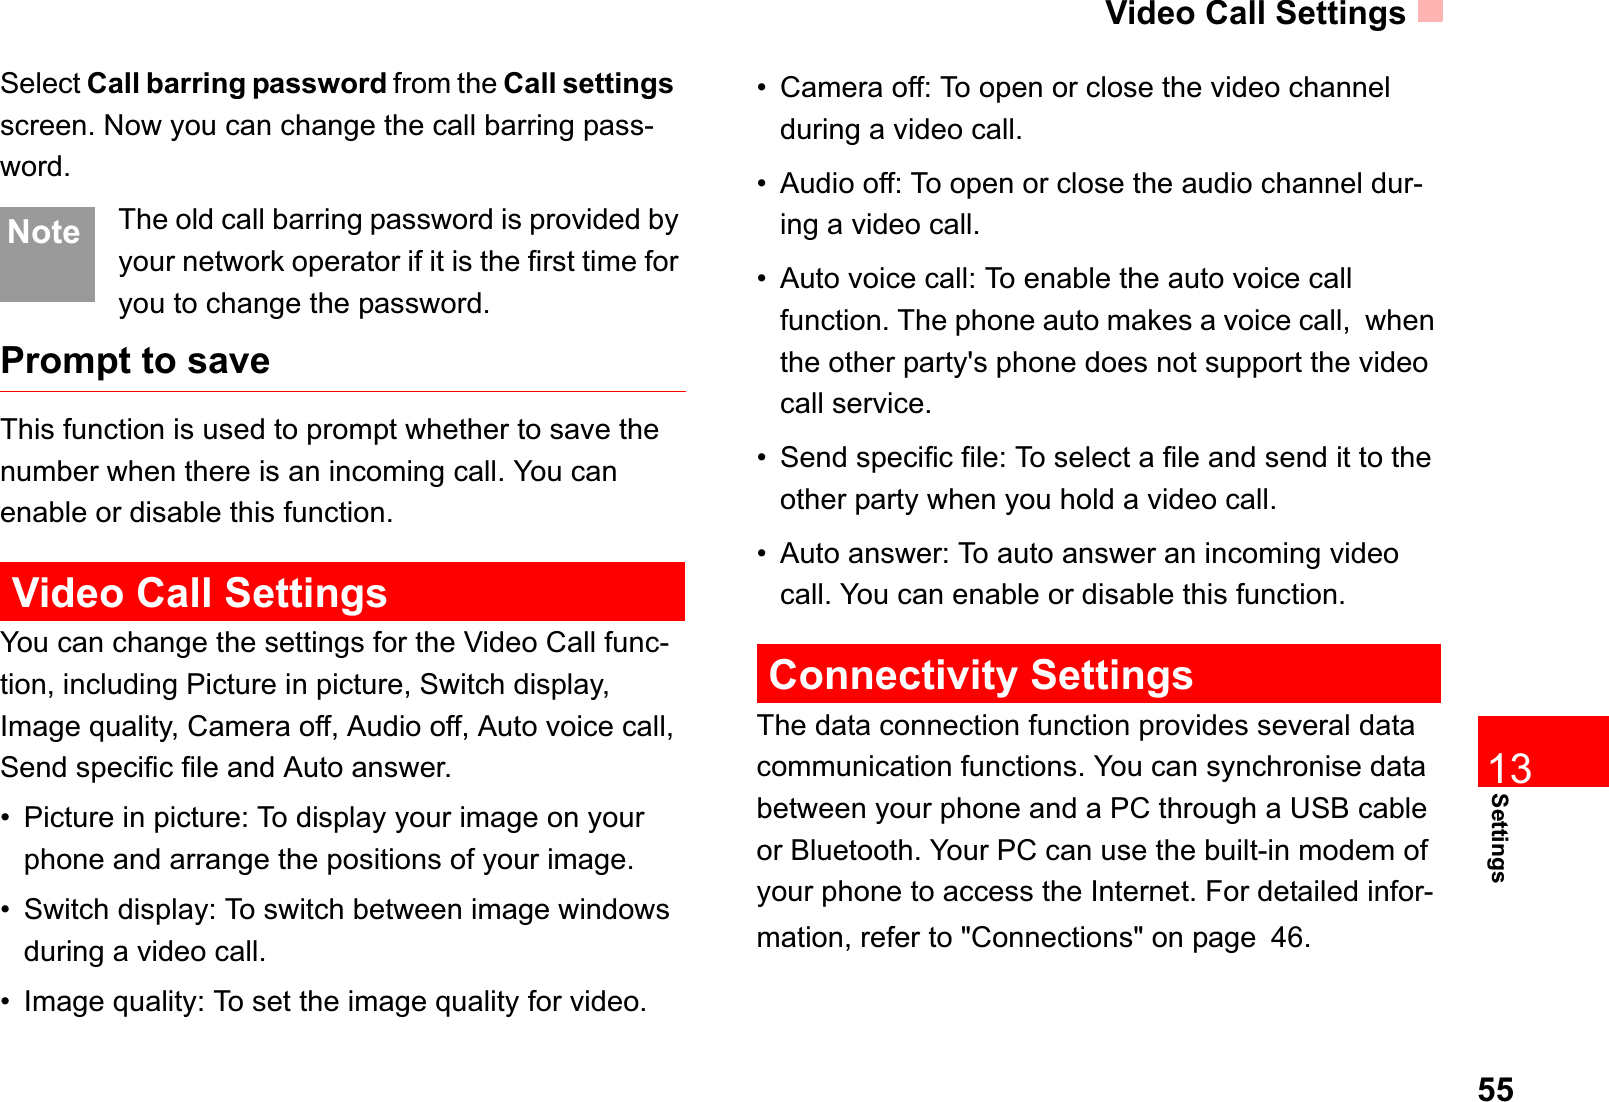 Video Call Settings55Settings13Select Call barring password from the Call settingsscreen. Now you can change the call barring pass-word.Note The old call barring password is provided by your network operator if it is the first time for you to change the password.Prompt to saveThis function is used to prompt whether to save the number when there is an incoming call. You can enable or disable this function.Video Call SettingsYou can change the settings for the Video Call func-tion, including Picture in picture, Switch display, Image quality, Camera off, Audio off, Auto voice call, Send specific file and Auto answer.• Picture in picture: To display your image on your phone and arrange the positions of your image.• Switch display: To switch between image windows during a video call. • Image quality: To set the image quality for video. • Camera off: To open or close the video channel during a video call.• Audio off: To open or close the audio channel dur-ing a video call.• Auto voice call: To enable the auto voice call function. The phone auto makes a voice call,  when the other party&apos;s phone does not support the video call service.• Send specific file: To select a file and send it to the other party when you hold a video call.• Auto answer: To auto answer an incoming video call. You can enable or disable this function.Connectivity SettingsThe data connection function provides several data communication functions. You can synchronise data between your phone and a PC through a USB cable or Bluetooth. Your PC can use the built-in modem of your phone to access the Internet. For detailed infor-mation, refer to &quot;Connections&quot; on page46.